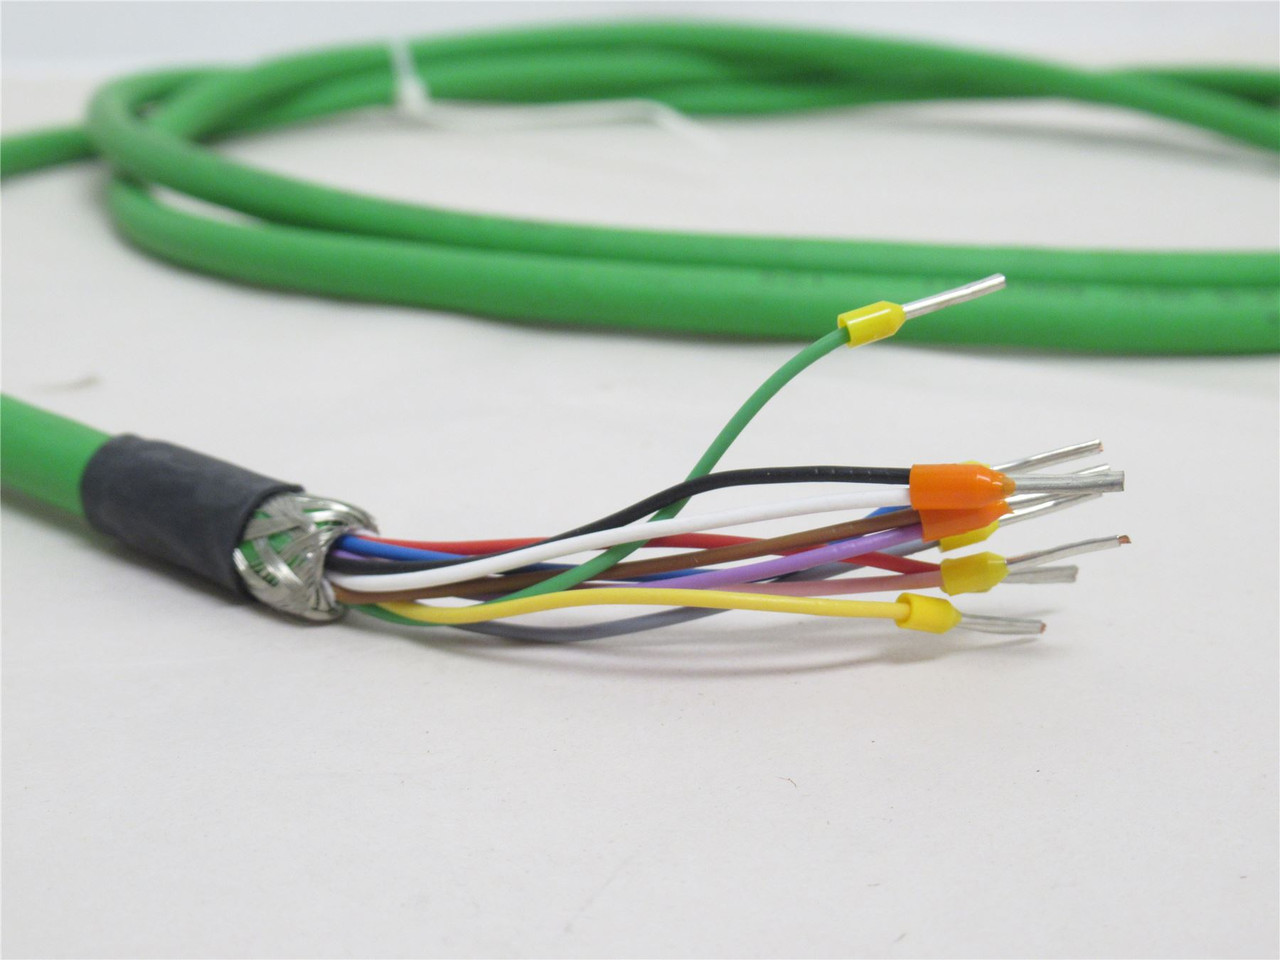 SEW 13324594.12; Encoder Cable; 2m Long; 15 Pin; Male